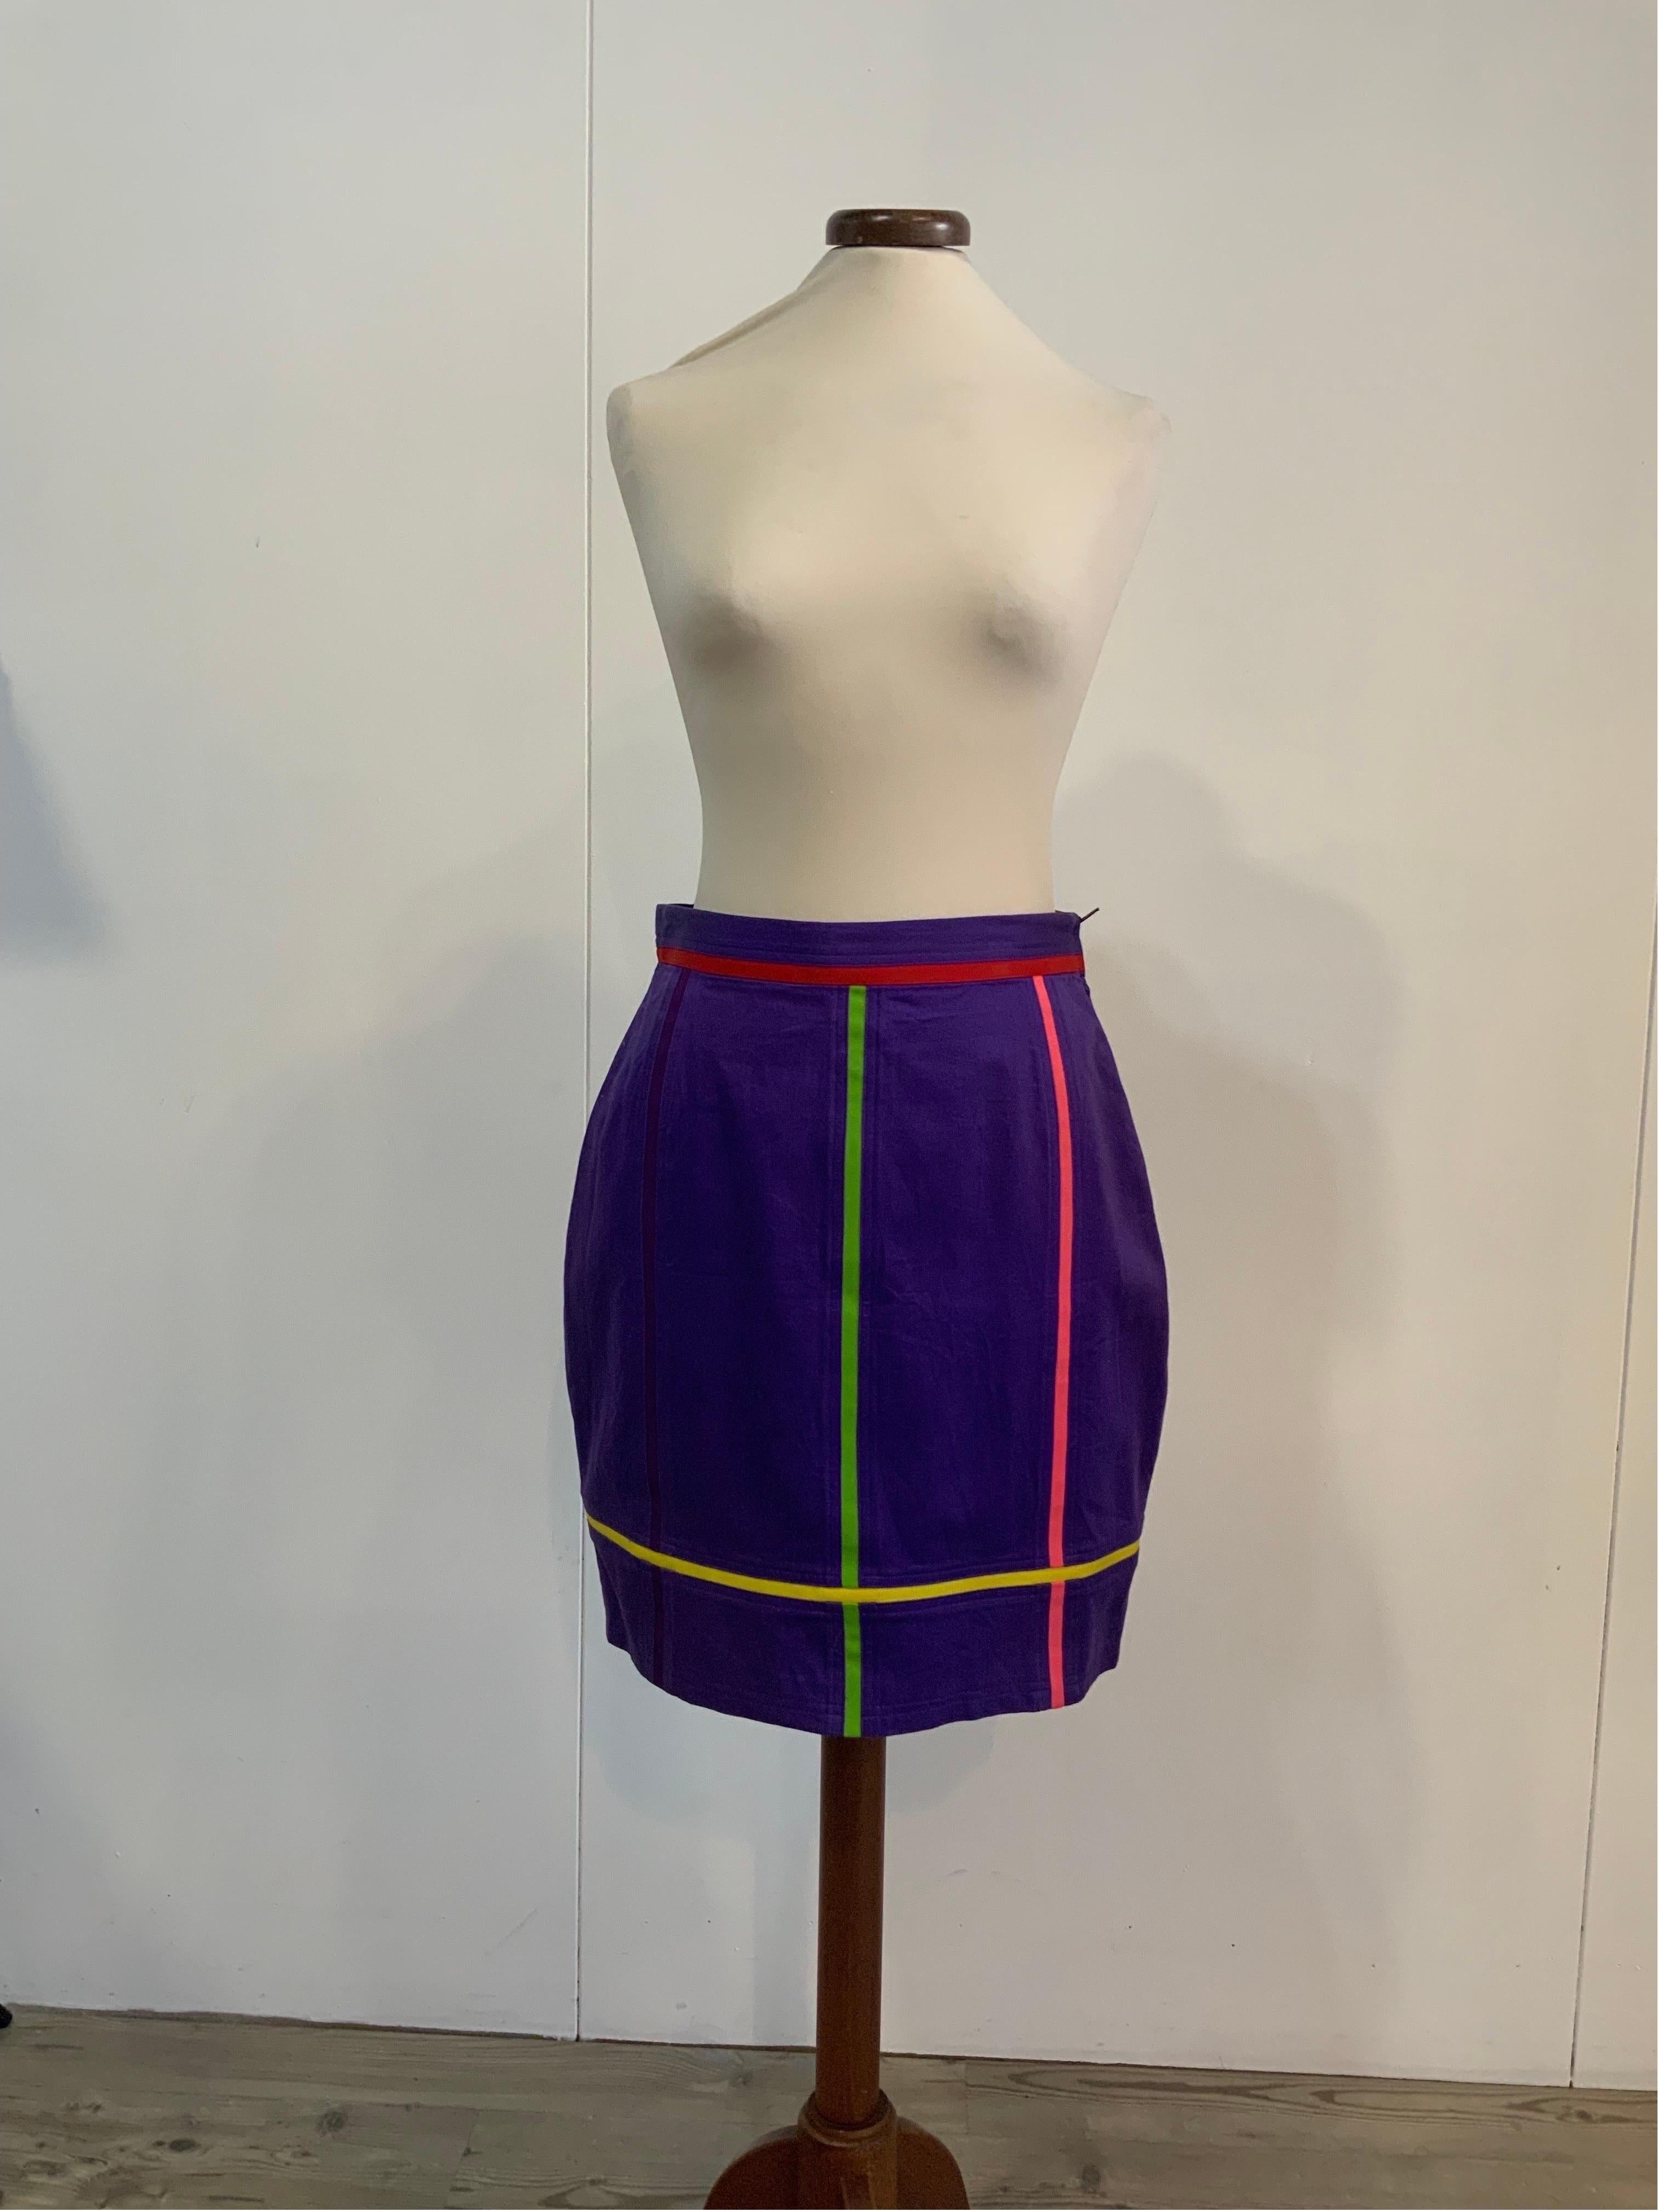 Versus By Gianni Versace skirt.
Violet Cotton.
Size 44 Italian.
Waist 36 cm
Hips 49 cm
Length 49 cm
In good general condition, it shows signs of normal use